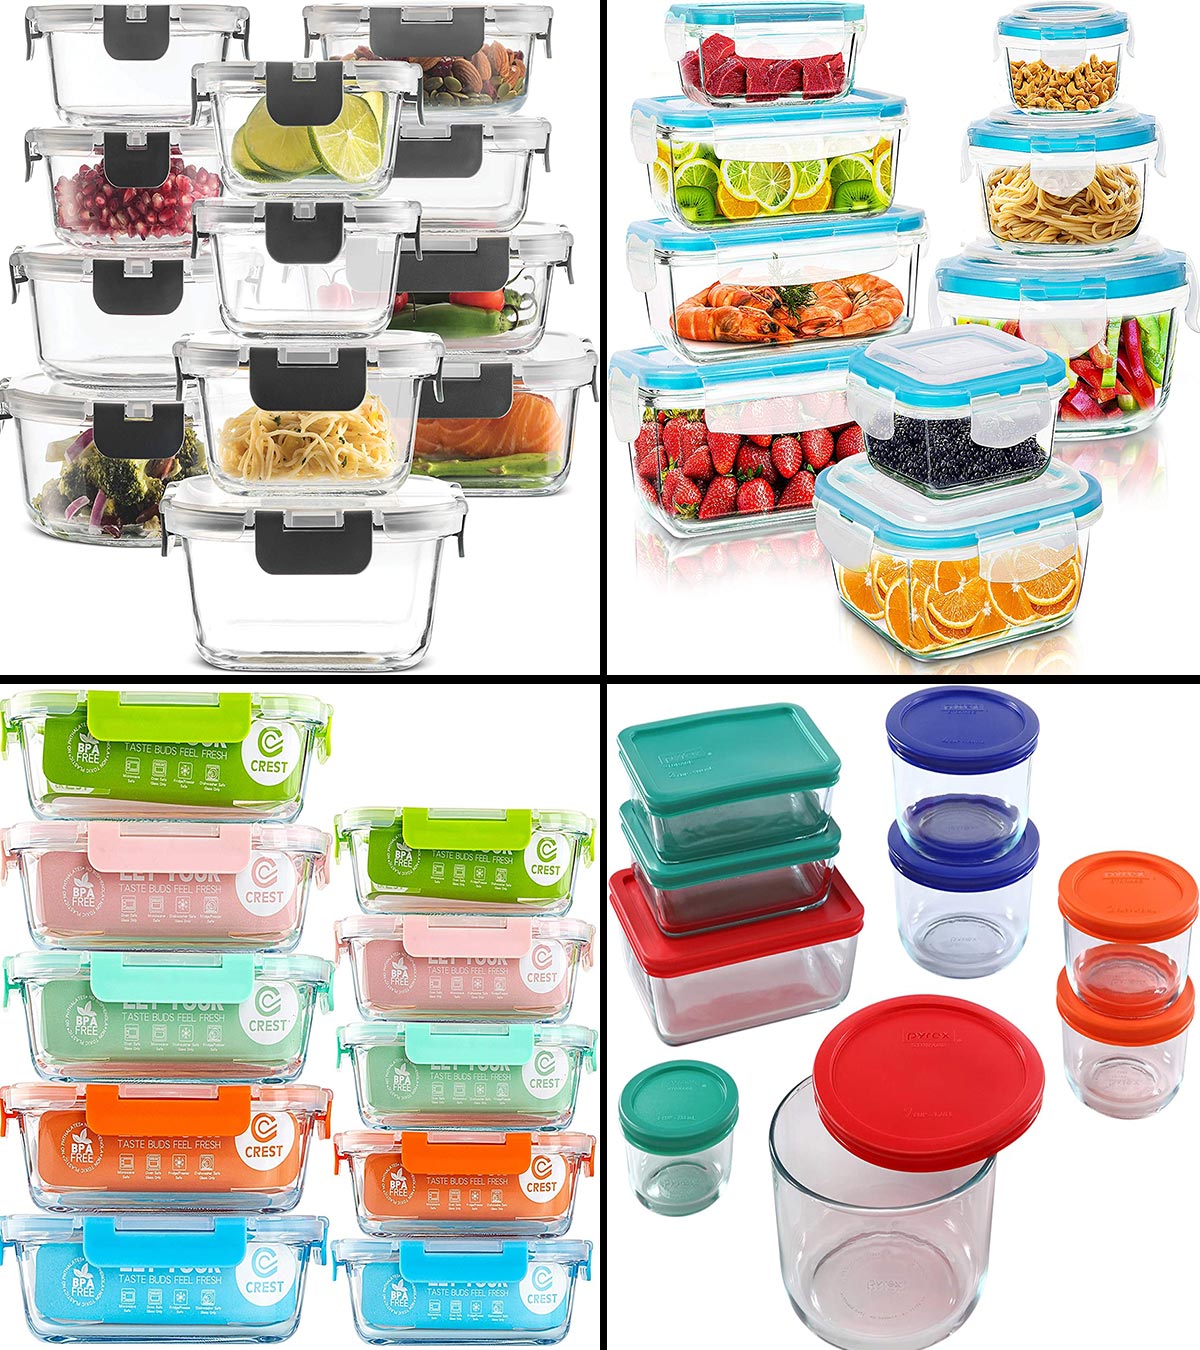  C CREST Glass Meal Prep Containers 2 Compartment Set